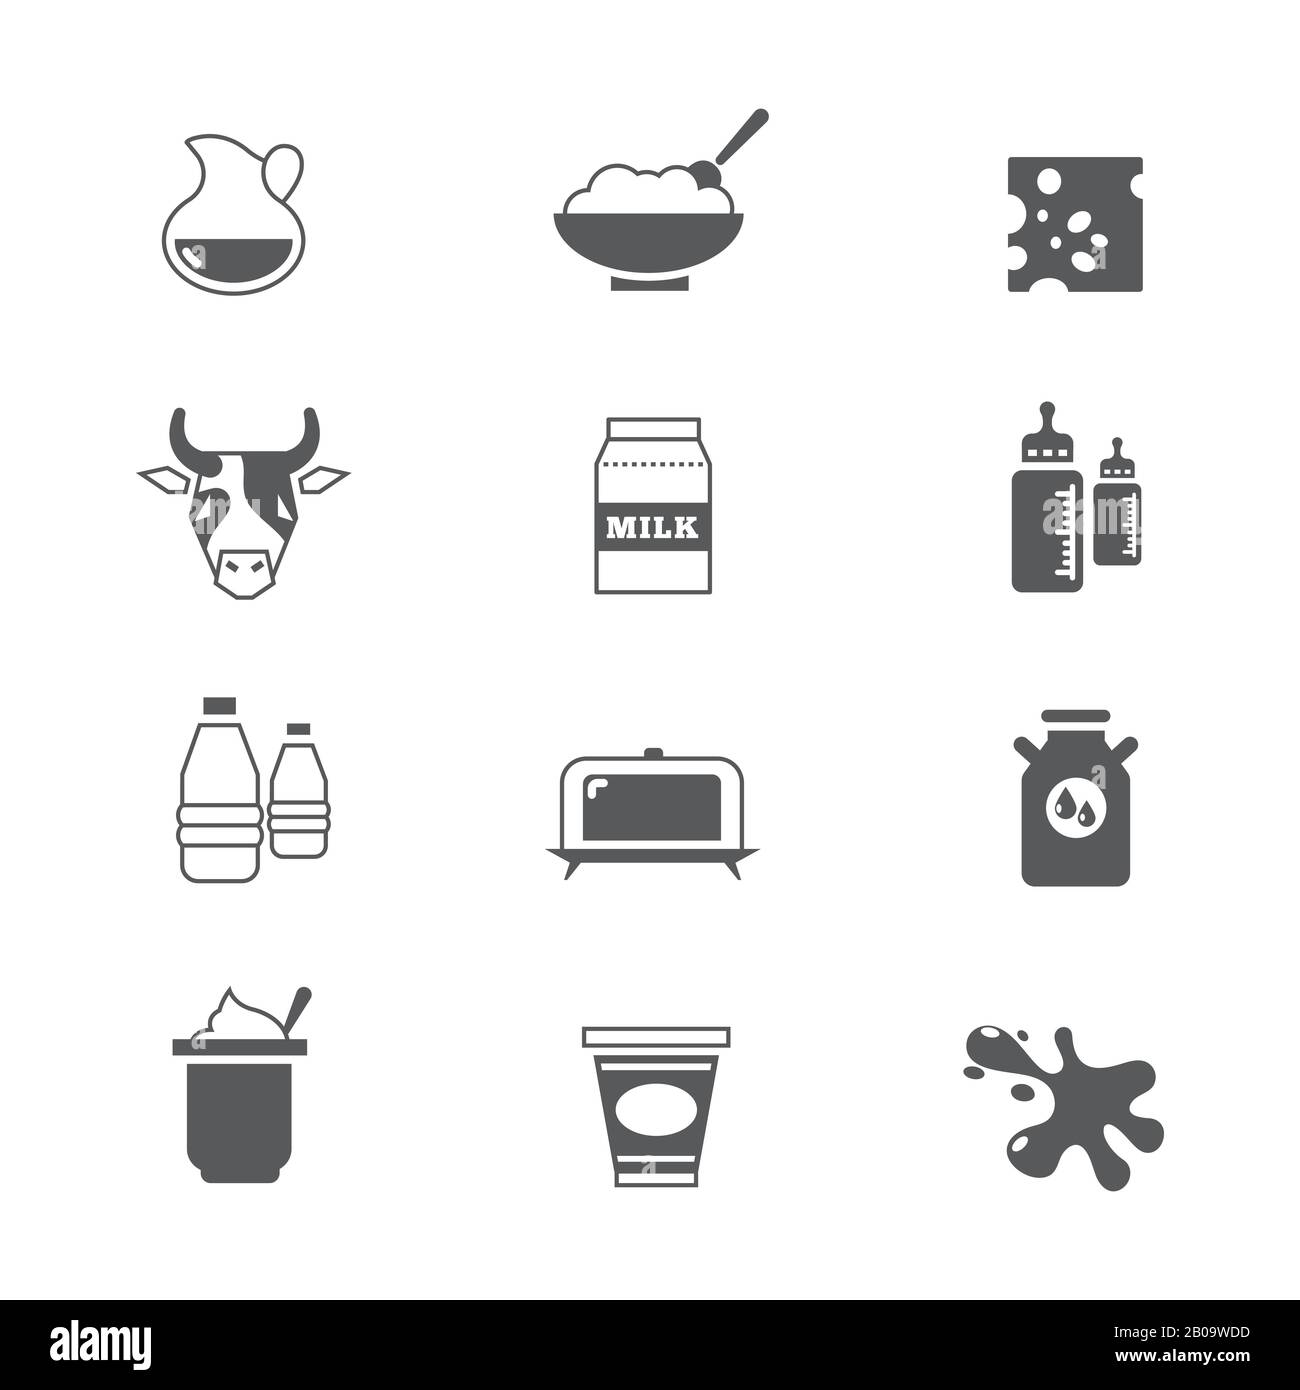 Diary products, milk vector icons set. Healthy product dairy illustration Stock Vector